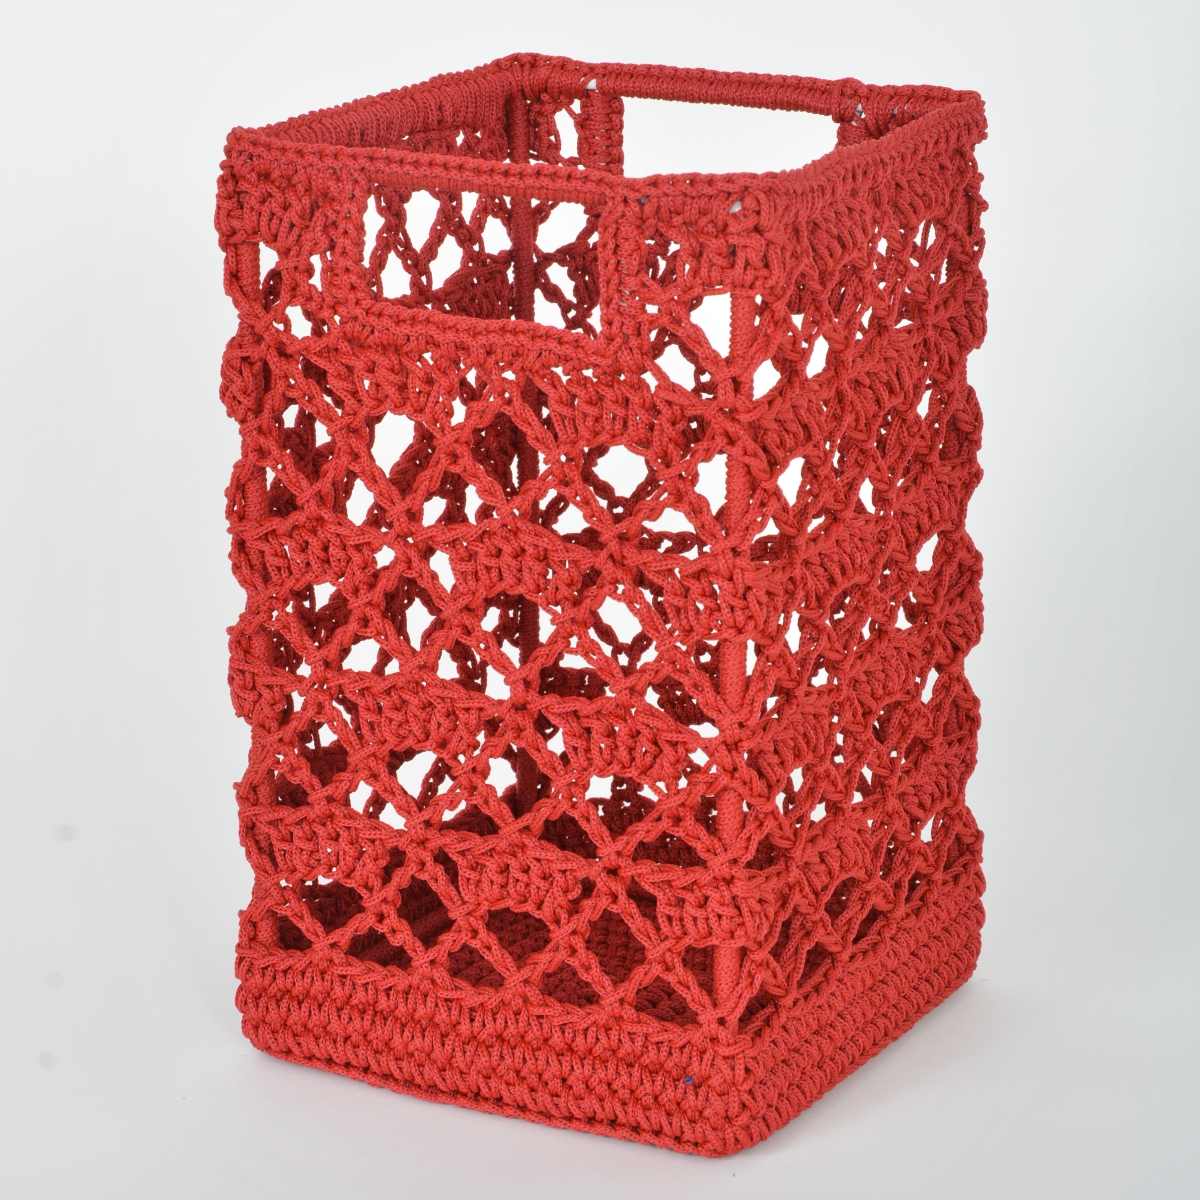 Picture of Heritage Lace MC-1125RR Mode Crochet Basket, Ruby Red - 9 x 5.5 x 5.5 in.